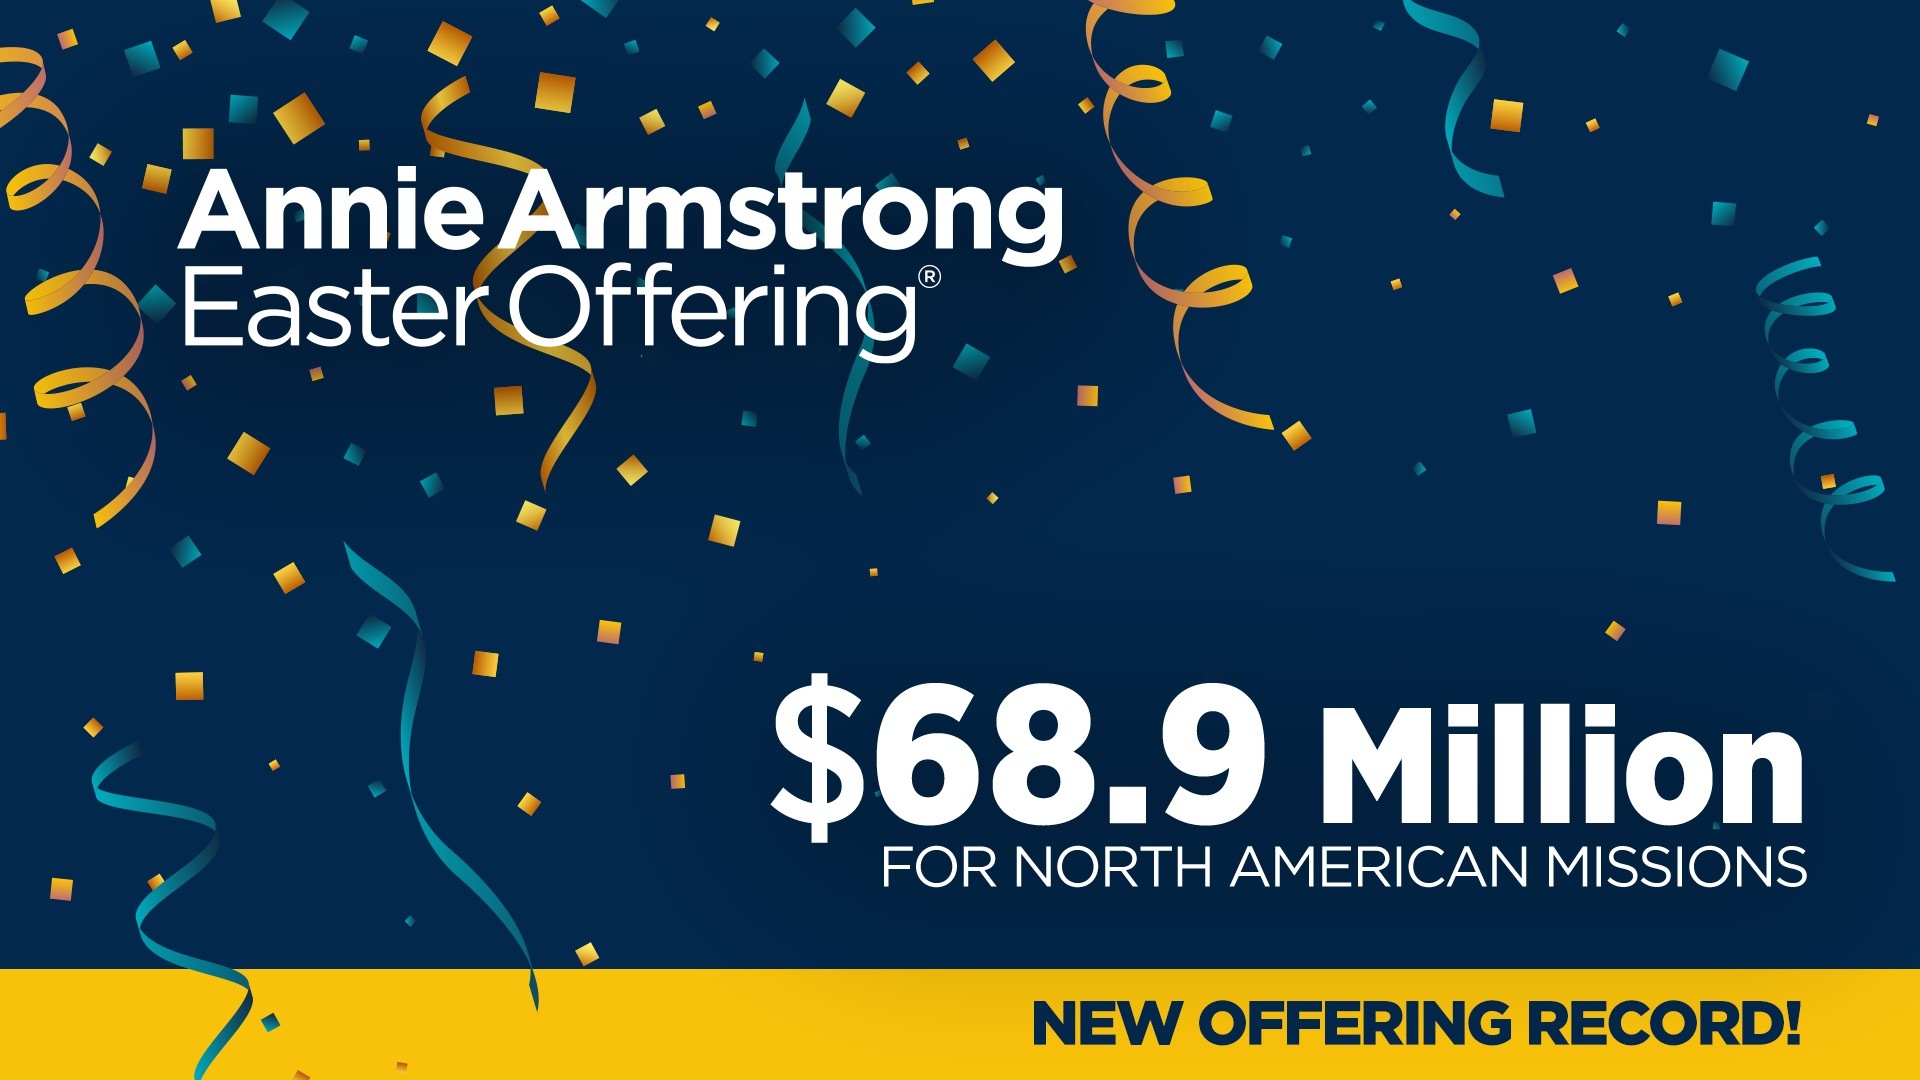 Annie Armstrong Easter Offering hits all-time high as Southern Baptists give record $68.9 million